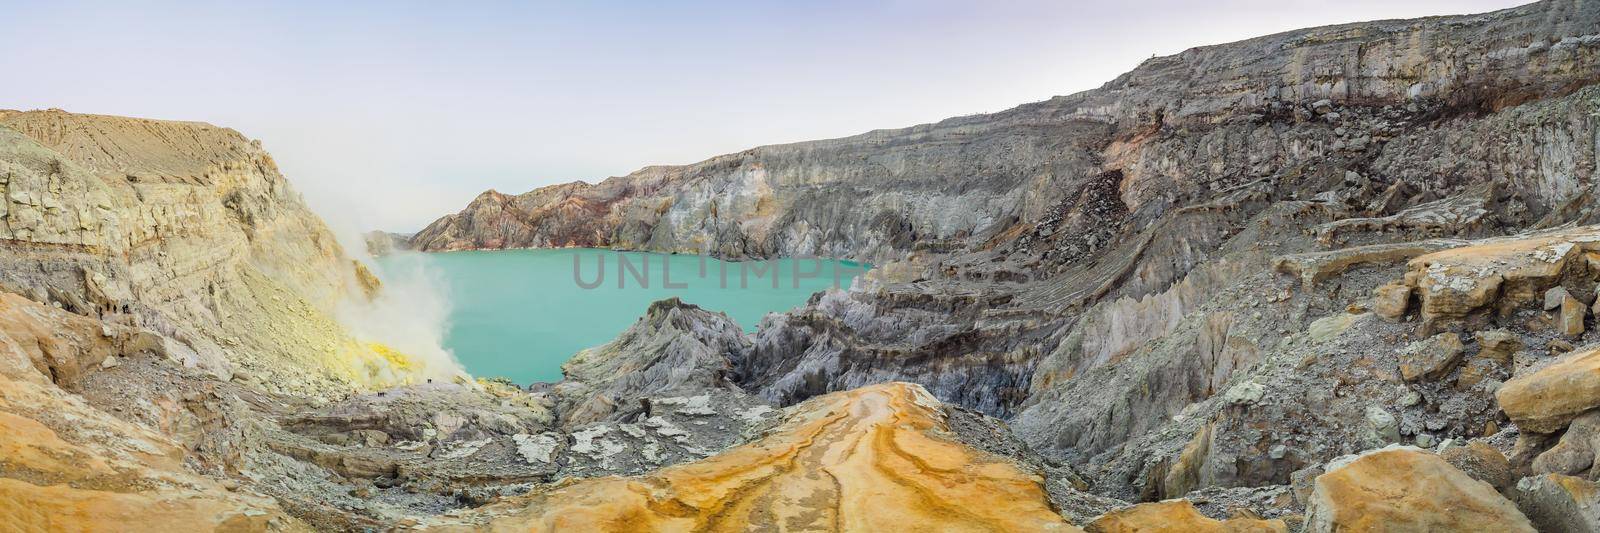 Panoramic shot of the Ijen volcano or Kawah Ijen on the Indonesian language. Famous volcano containing the biggest in the world acid lake and sulfur mining spot at the place where volcanic gasses come from the volcano.